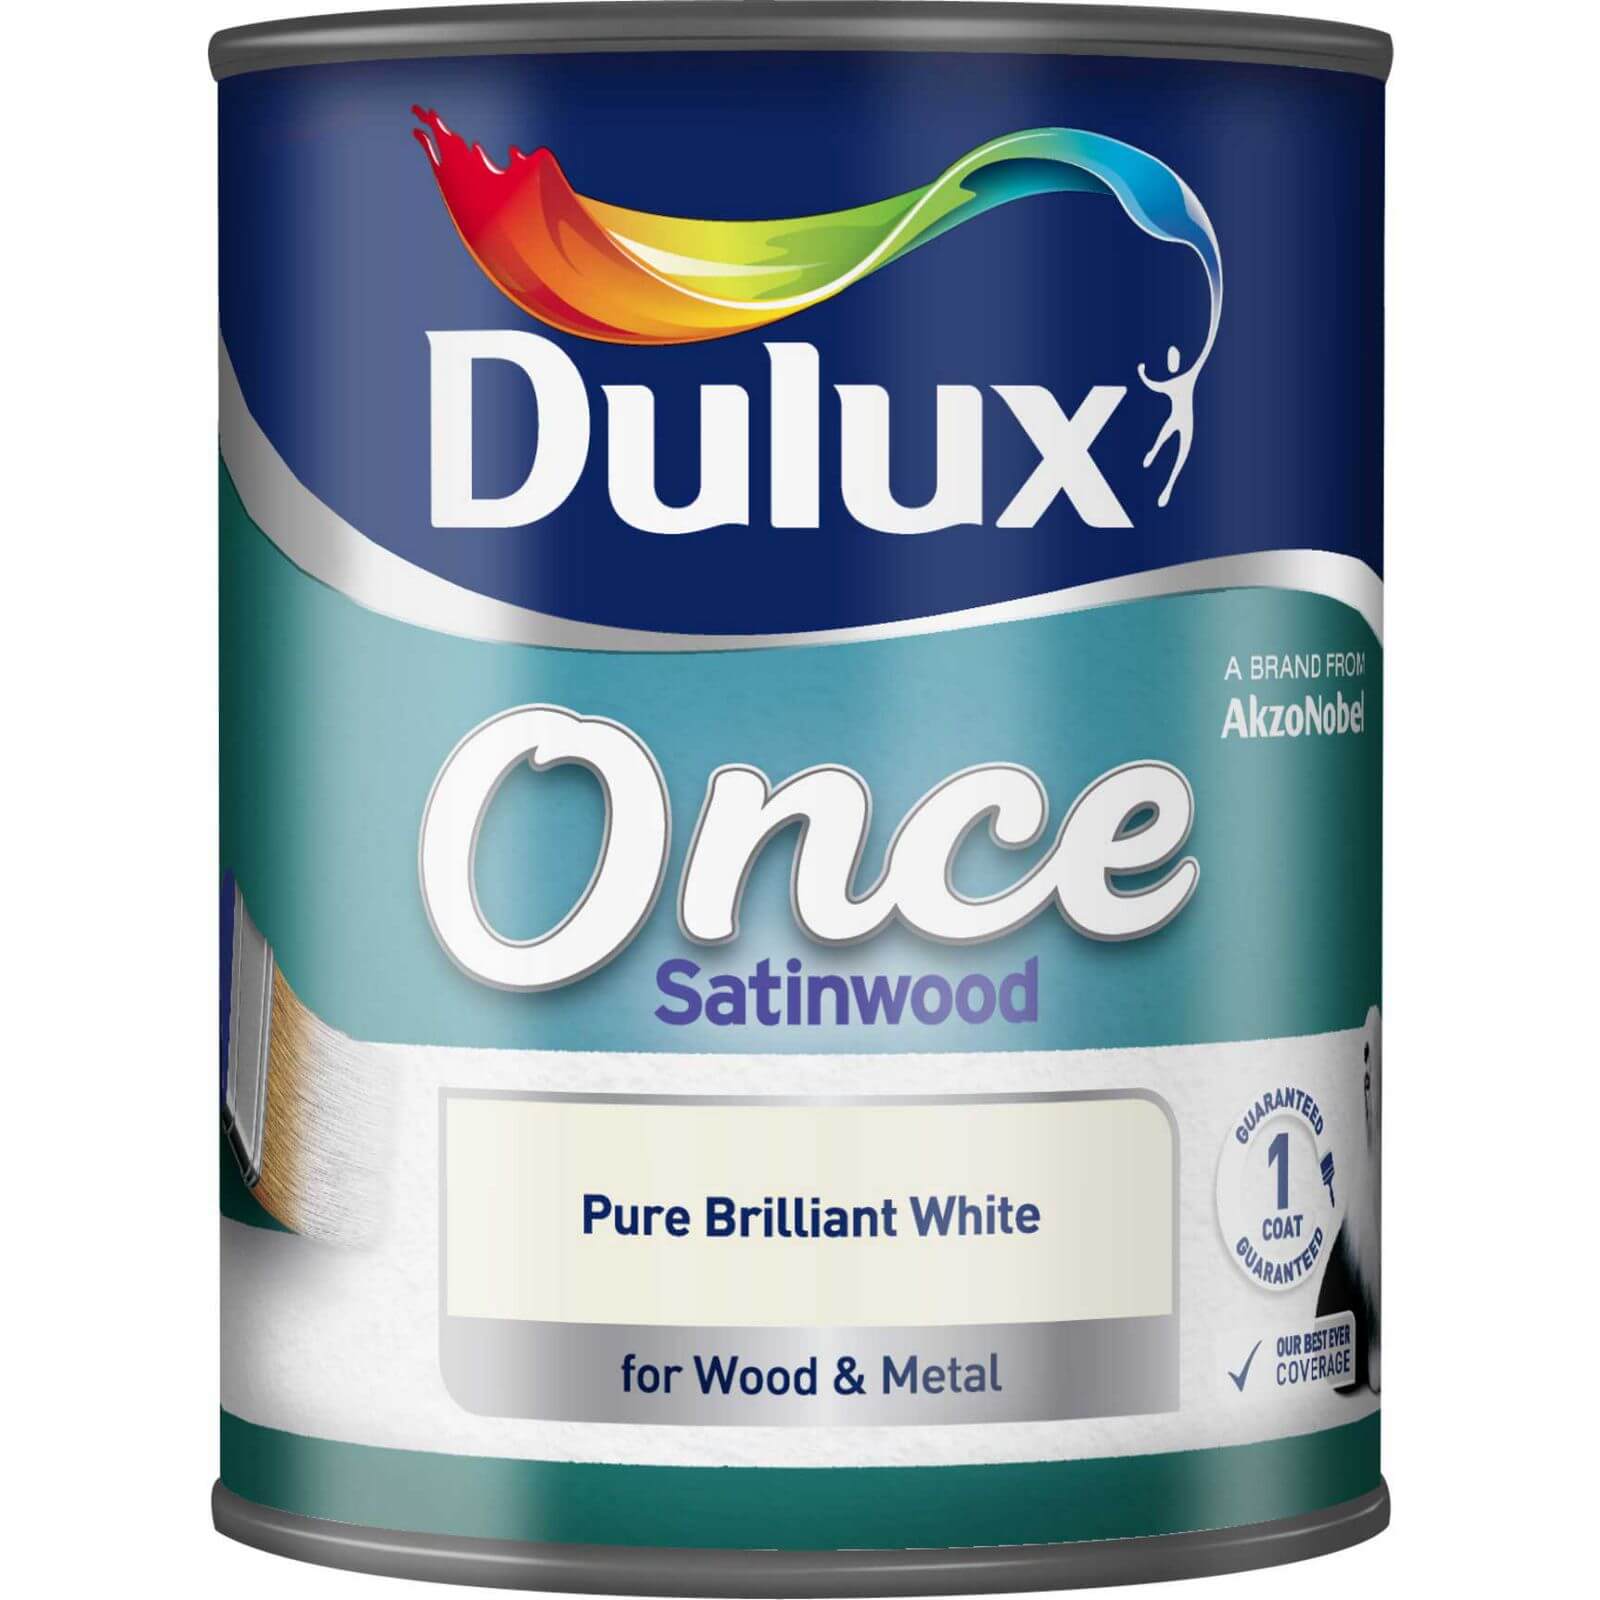 Dulux Once Satinwood Paint Pure Brilliant White - 750ml